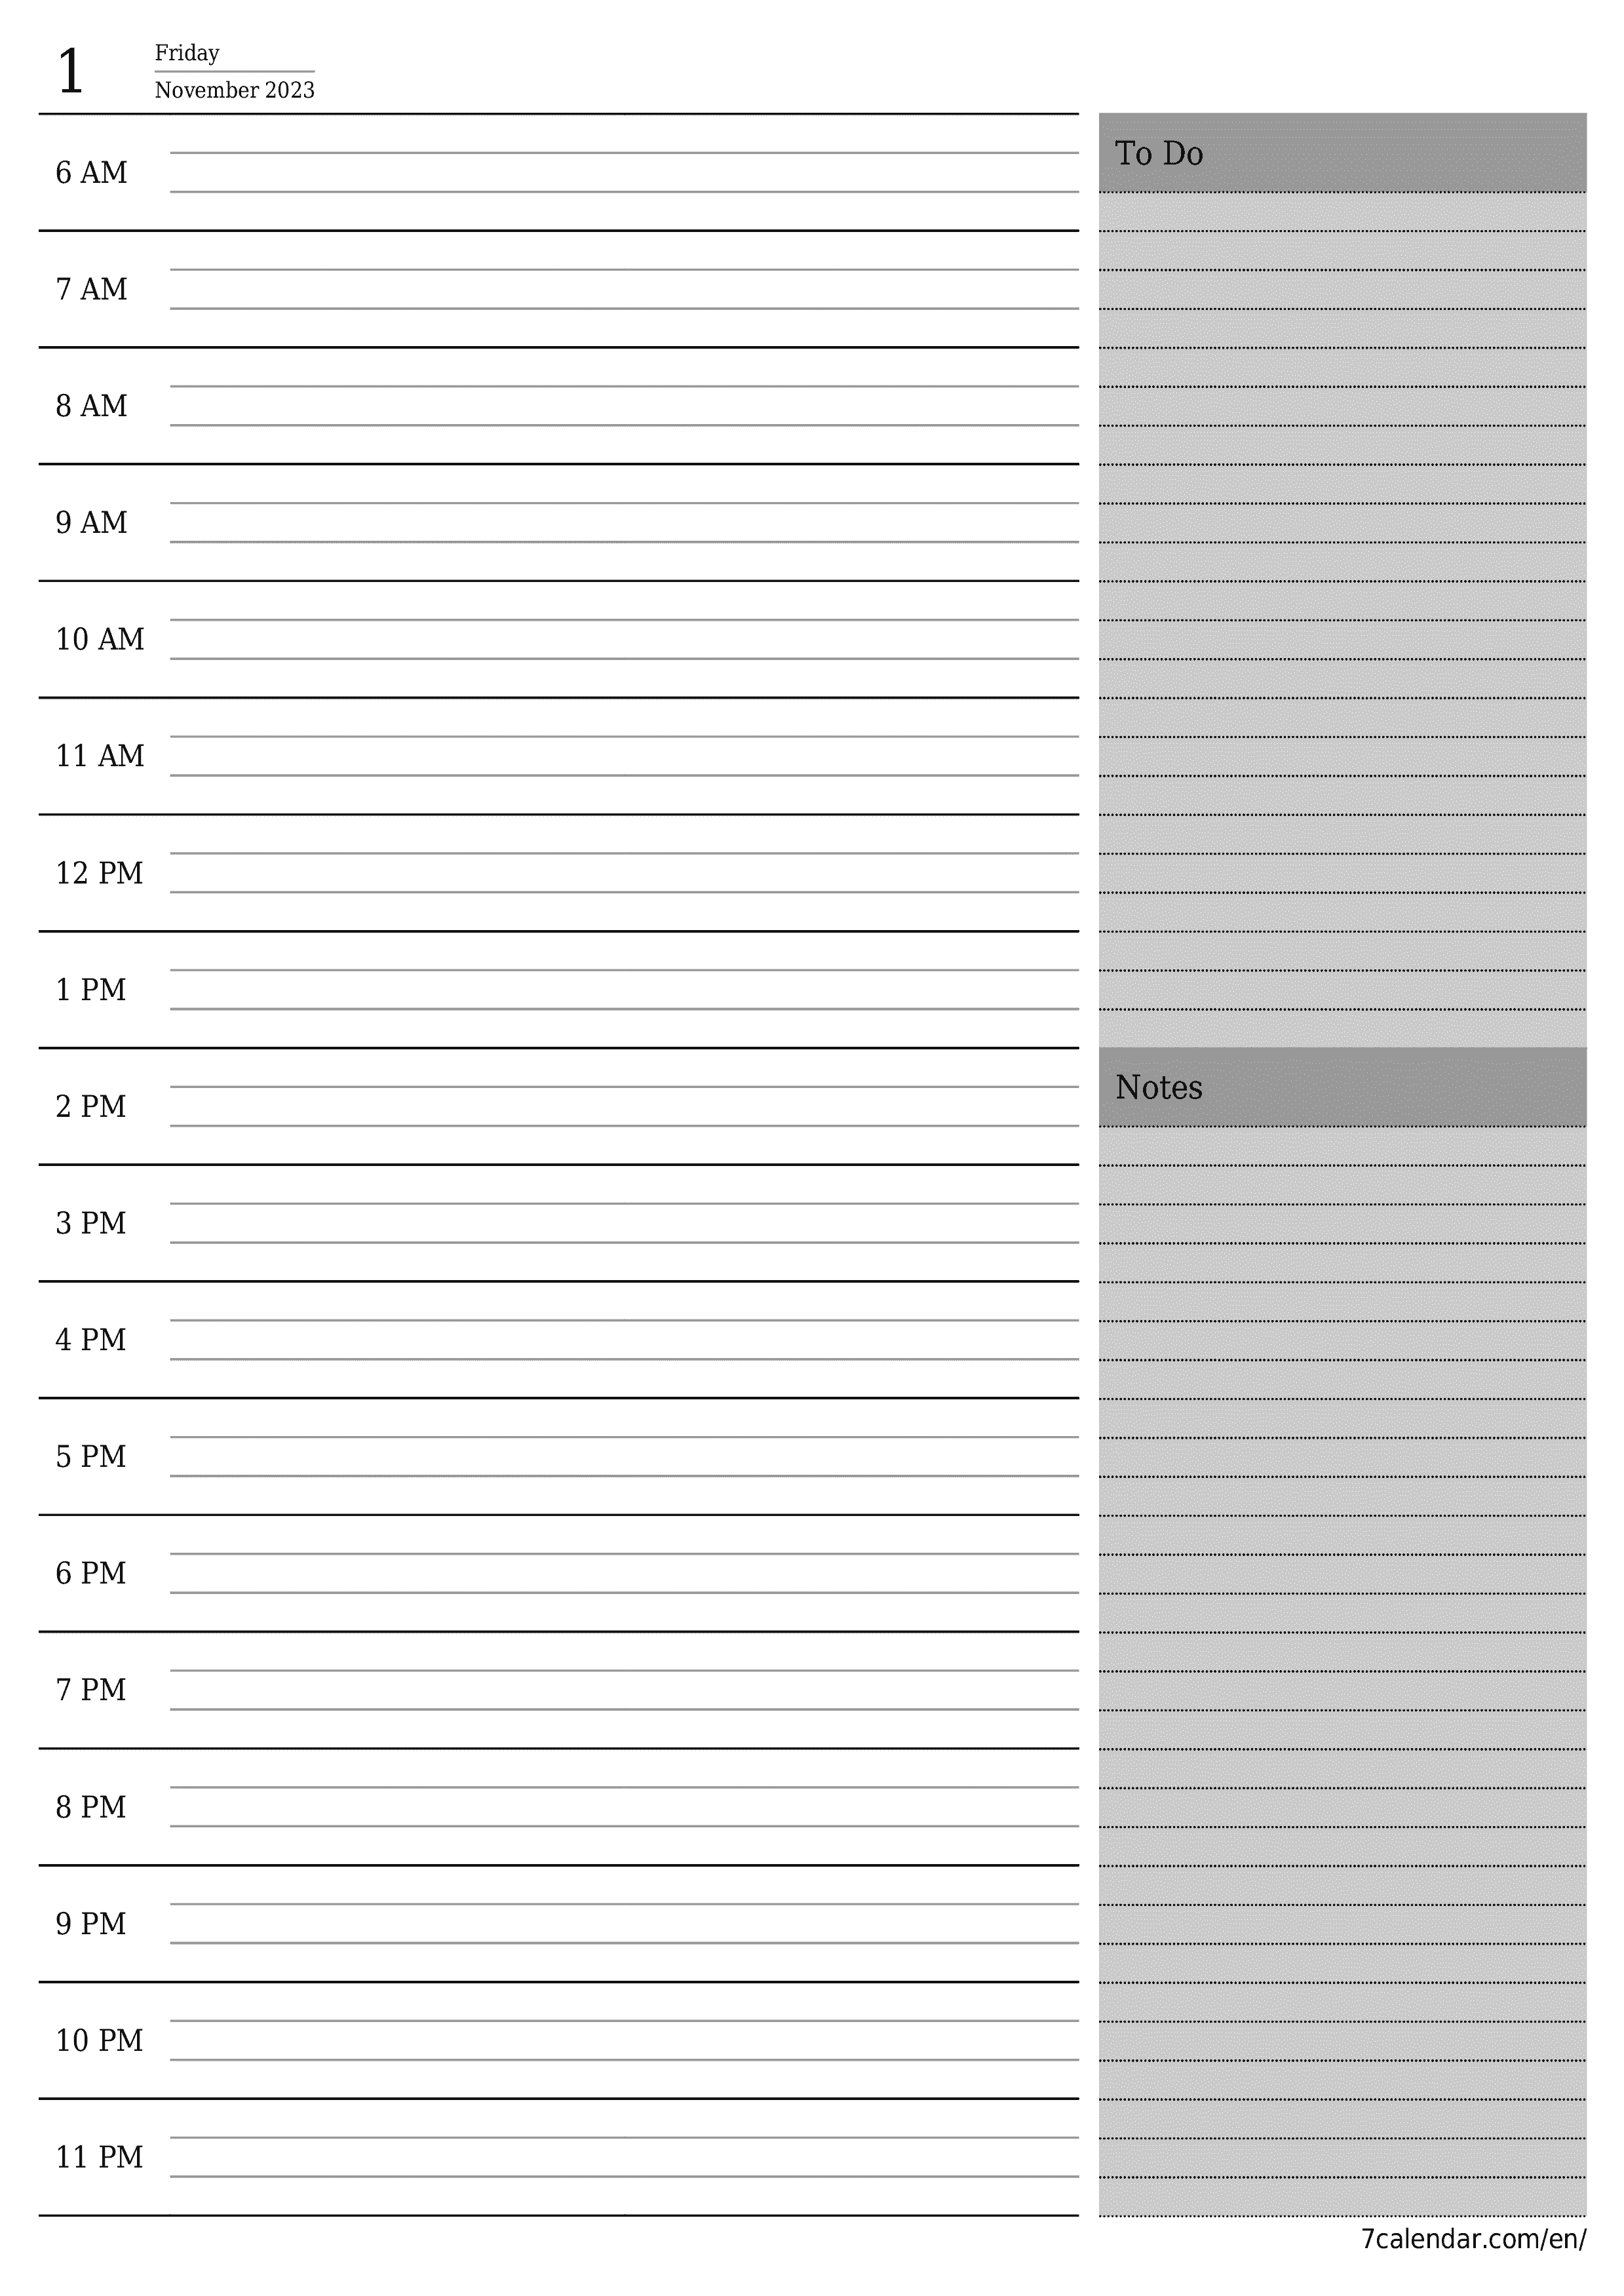 Blank daily calendar planner for day November 2023 with notes, save and print to PDF PNG English - 7calendar.com